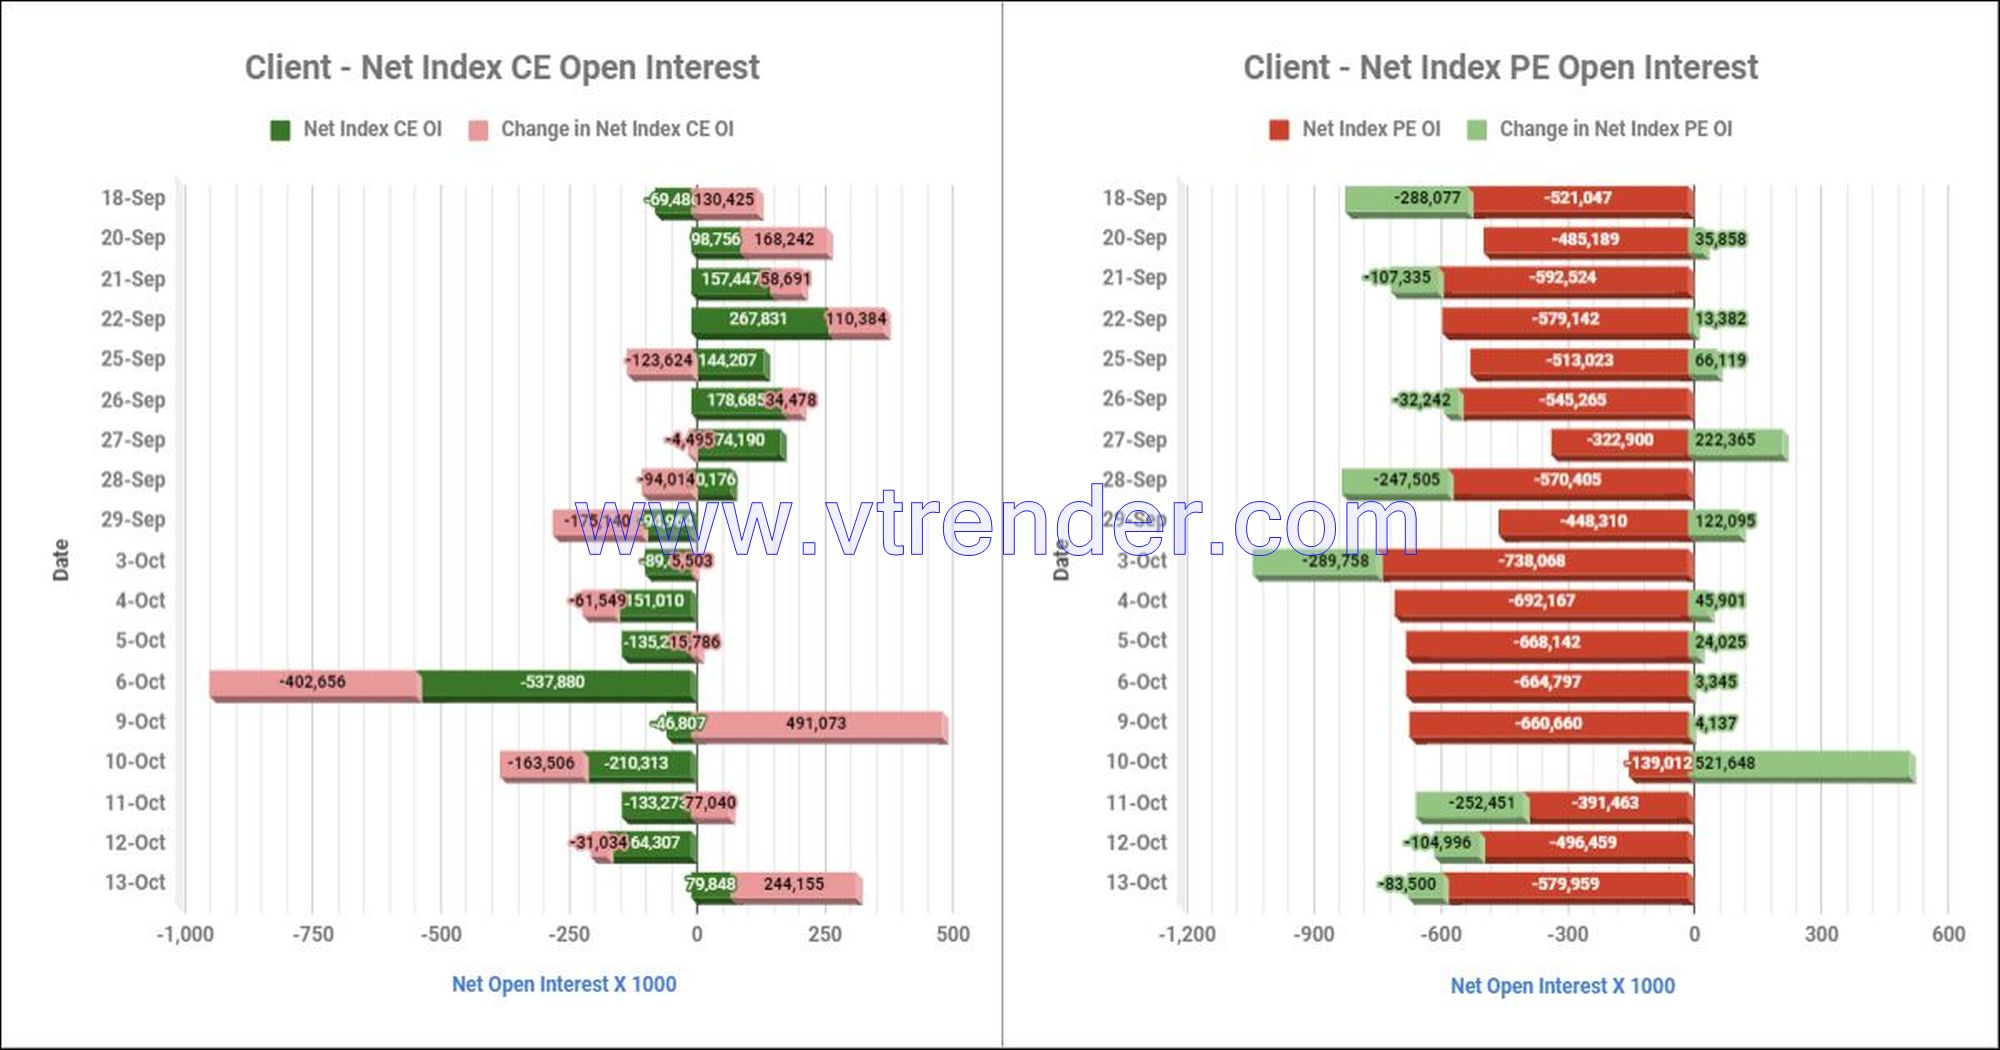 Clientinop13Oct Participantwise Net Open Interest And Net Equity Investments – 13Th Oct 2023 Ce, Client, Dii, Fii, Index Futures, Index Options, Open Interest, Pe, Prop, Stocks Futures